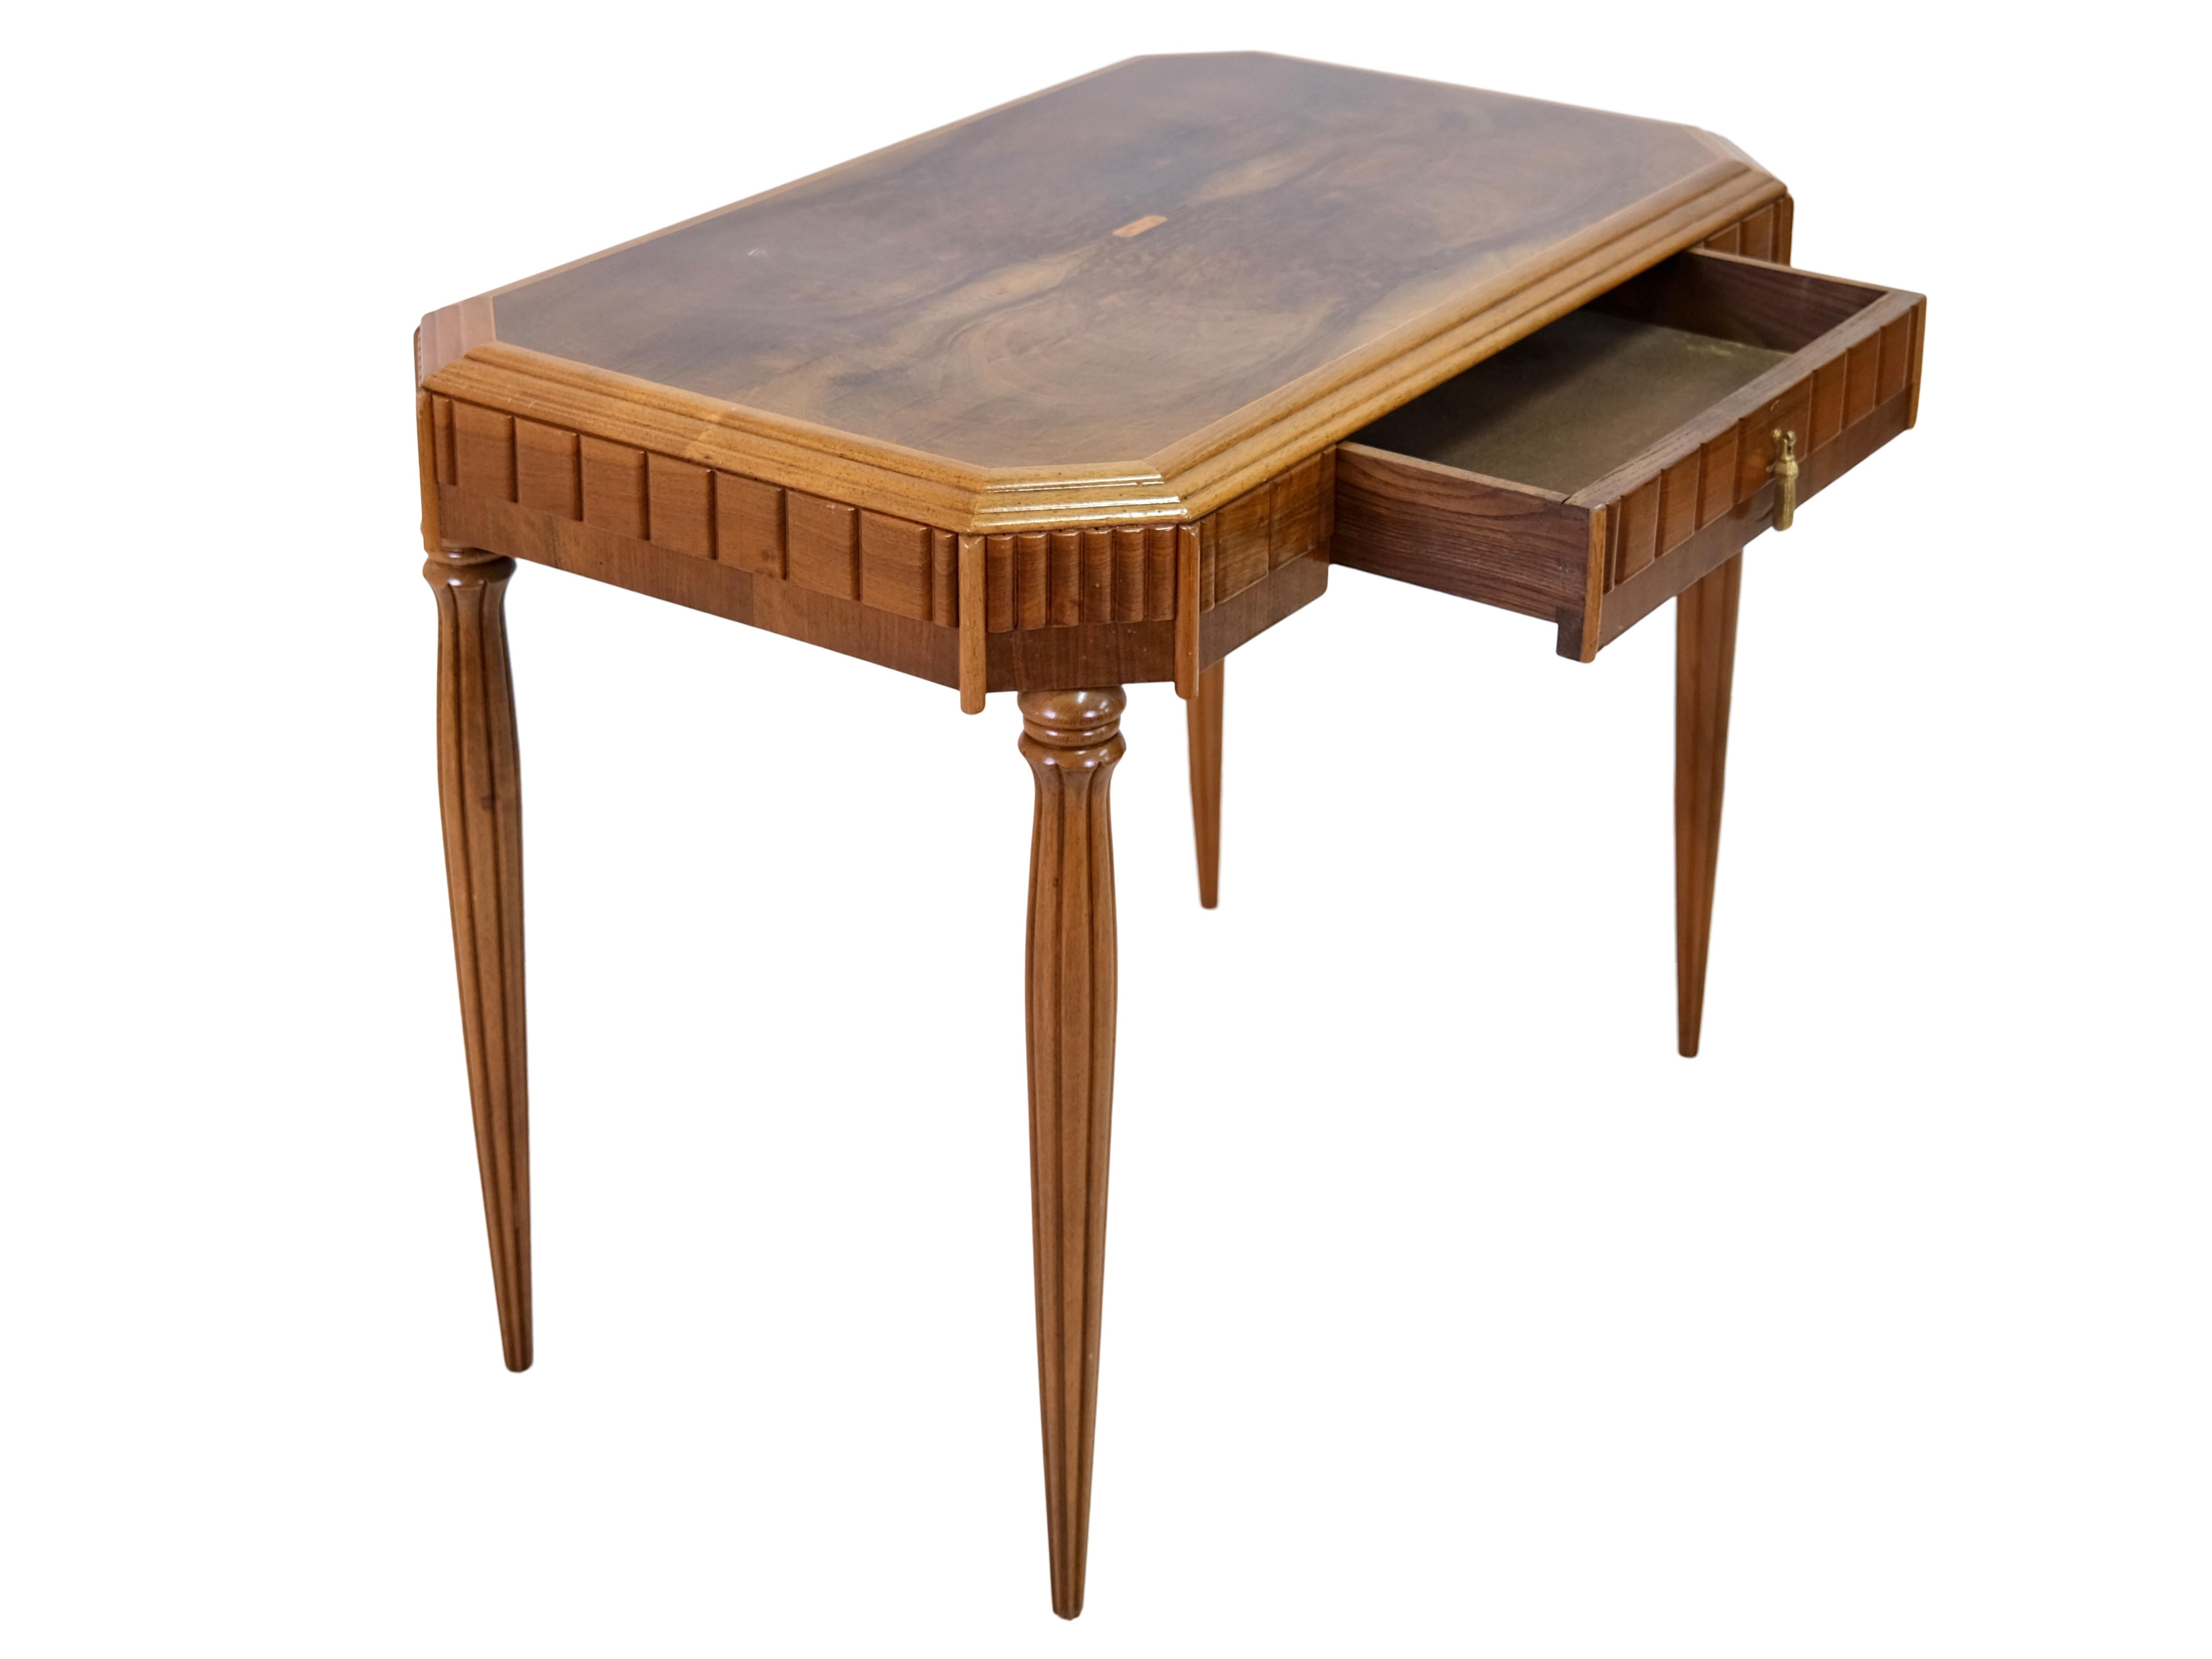 Veneer Early French Art Deco Desk in Nutwood, circa 1925 For Sale